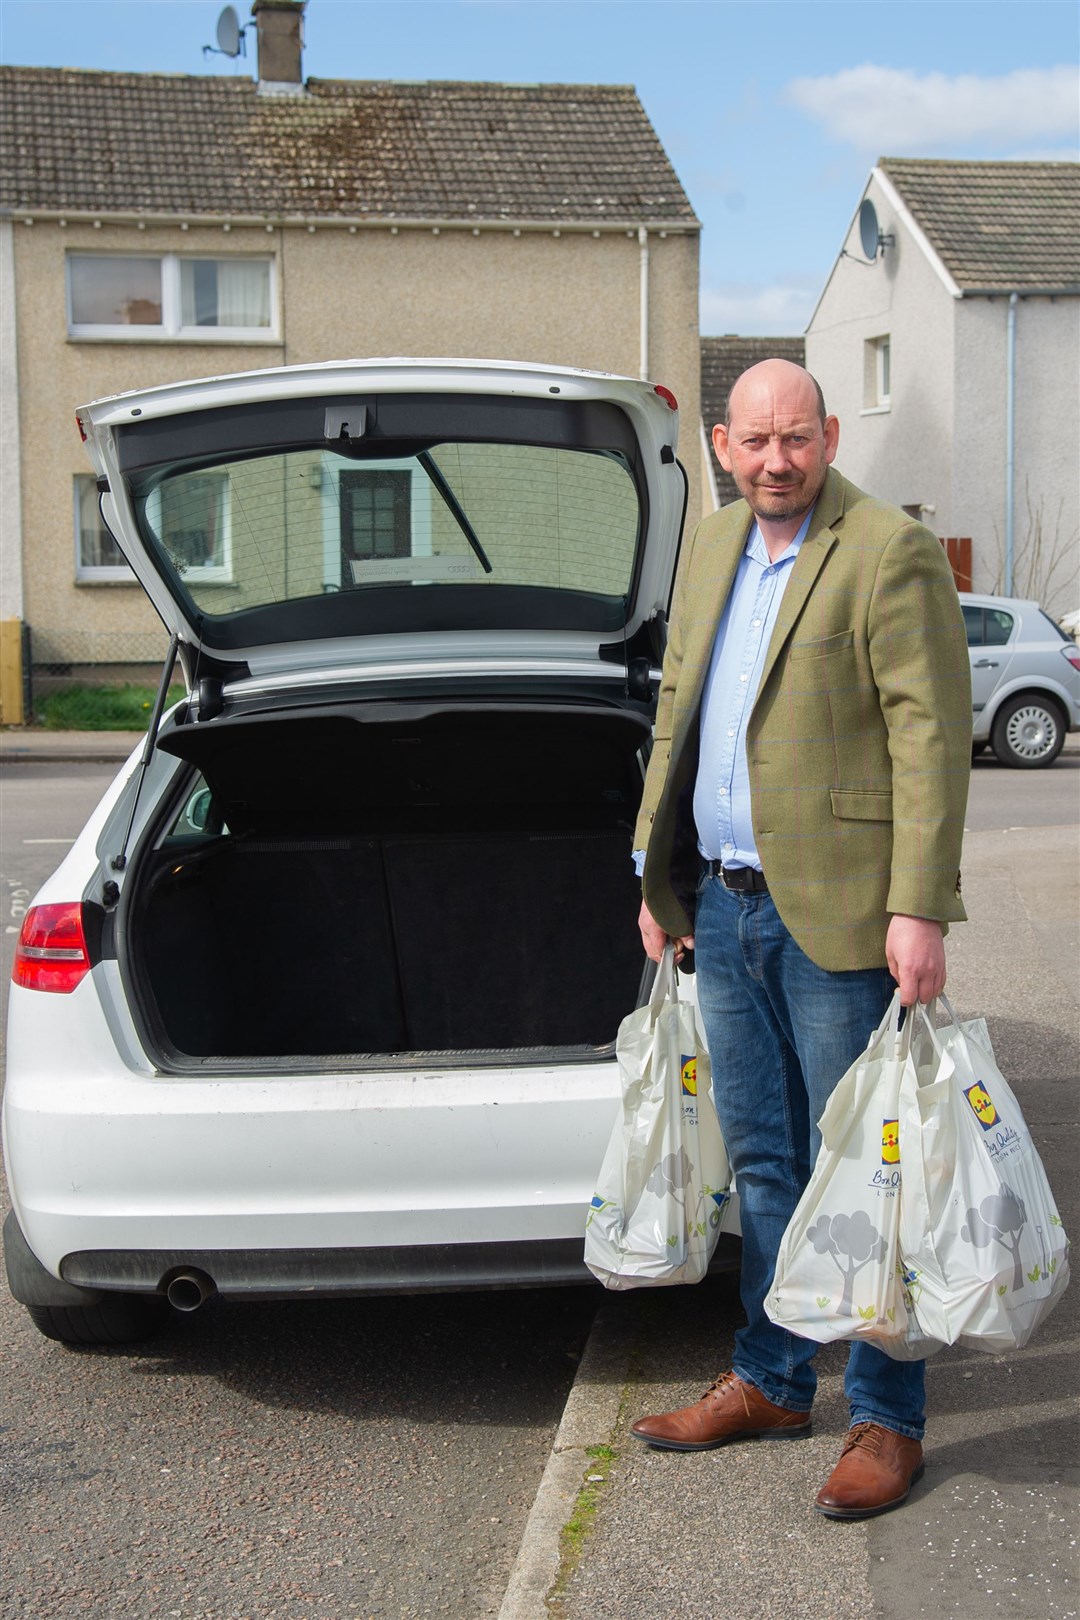 Over the past few weeks, Paul Briggs has been busy doing the shopping for 19 households in the area to help folk who cannot leave their houses due to the cornavirus outbreak. Picture: Daniel Forsyth.